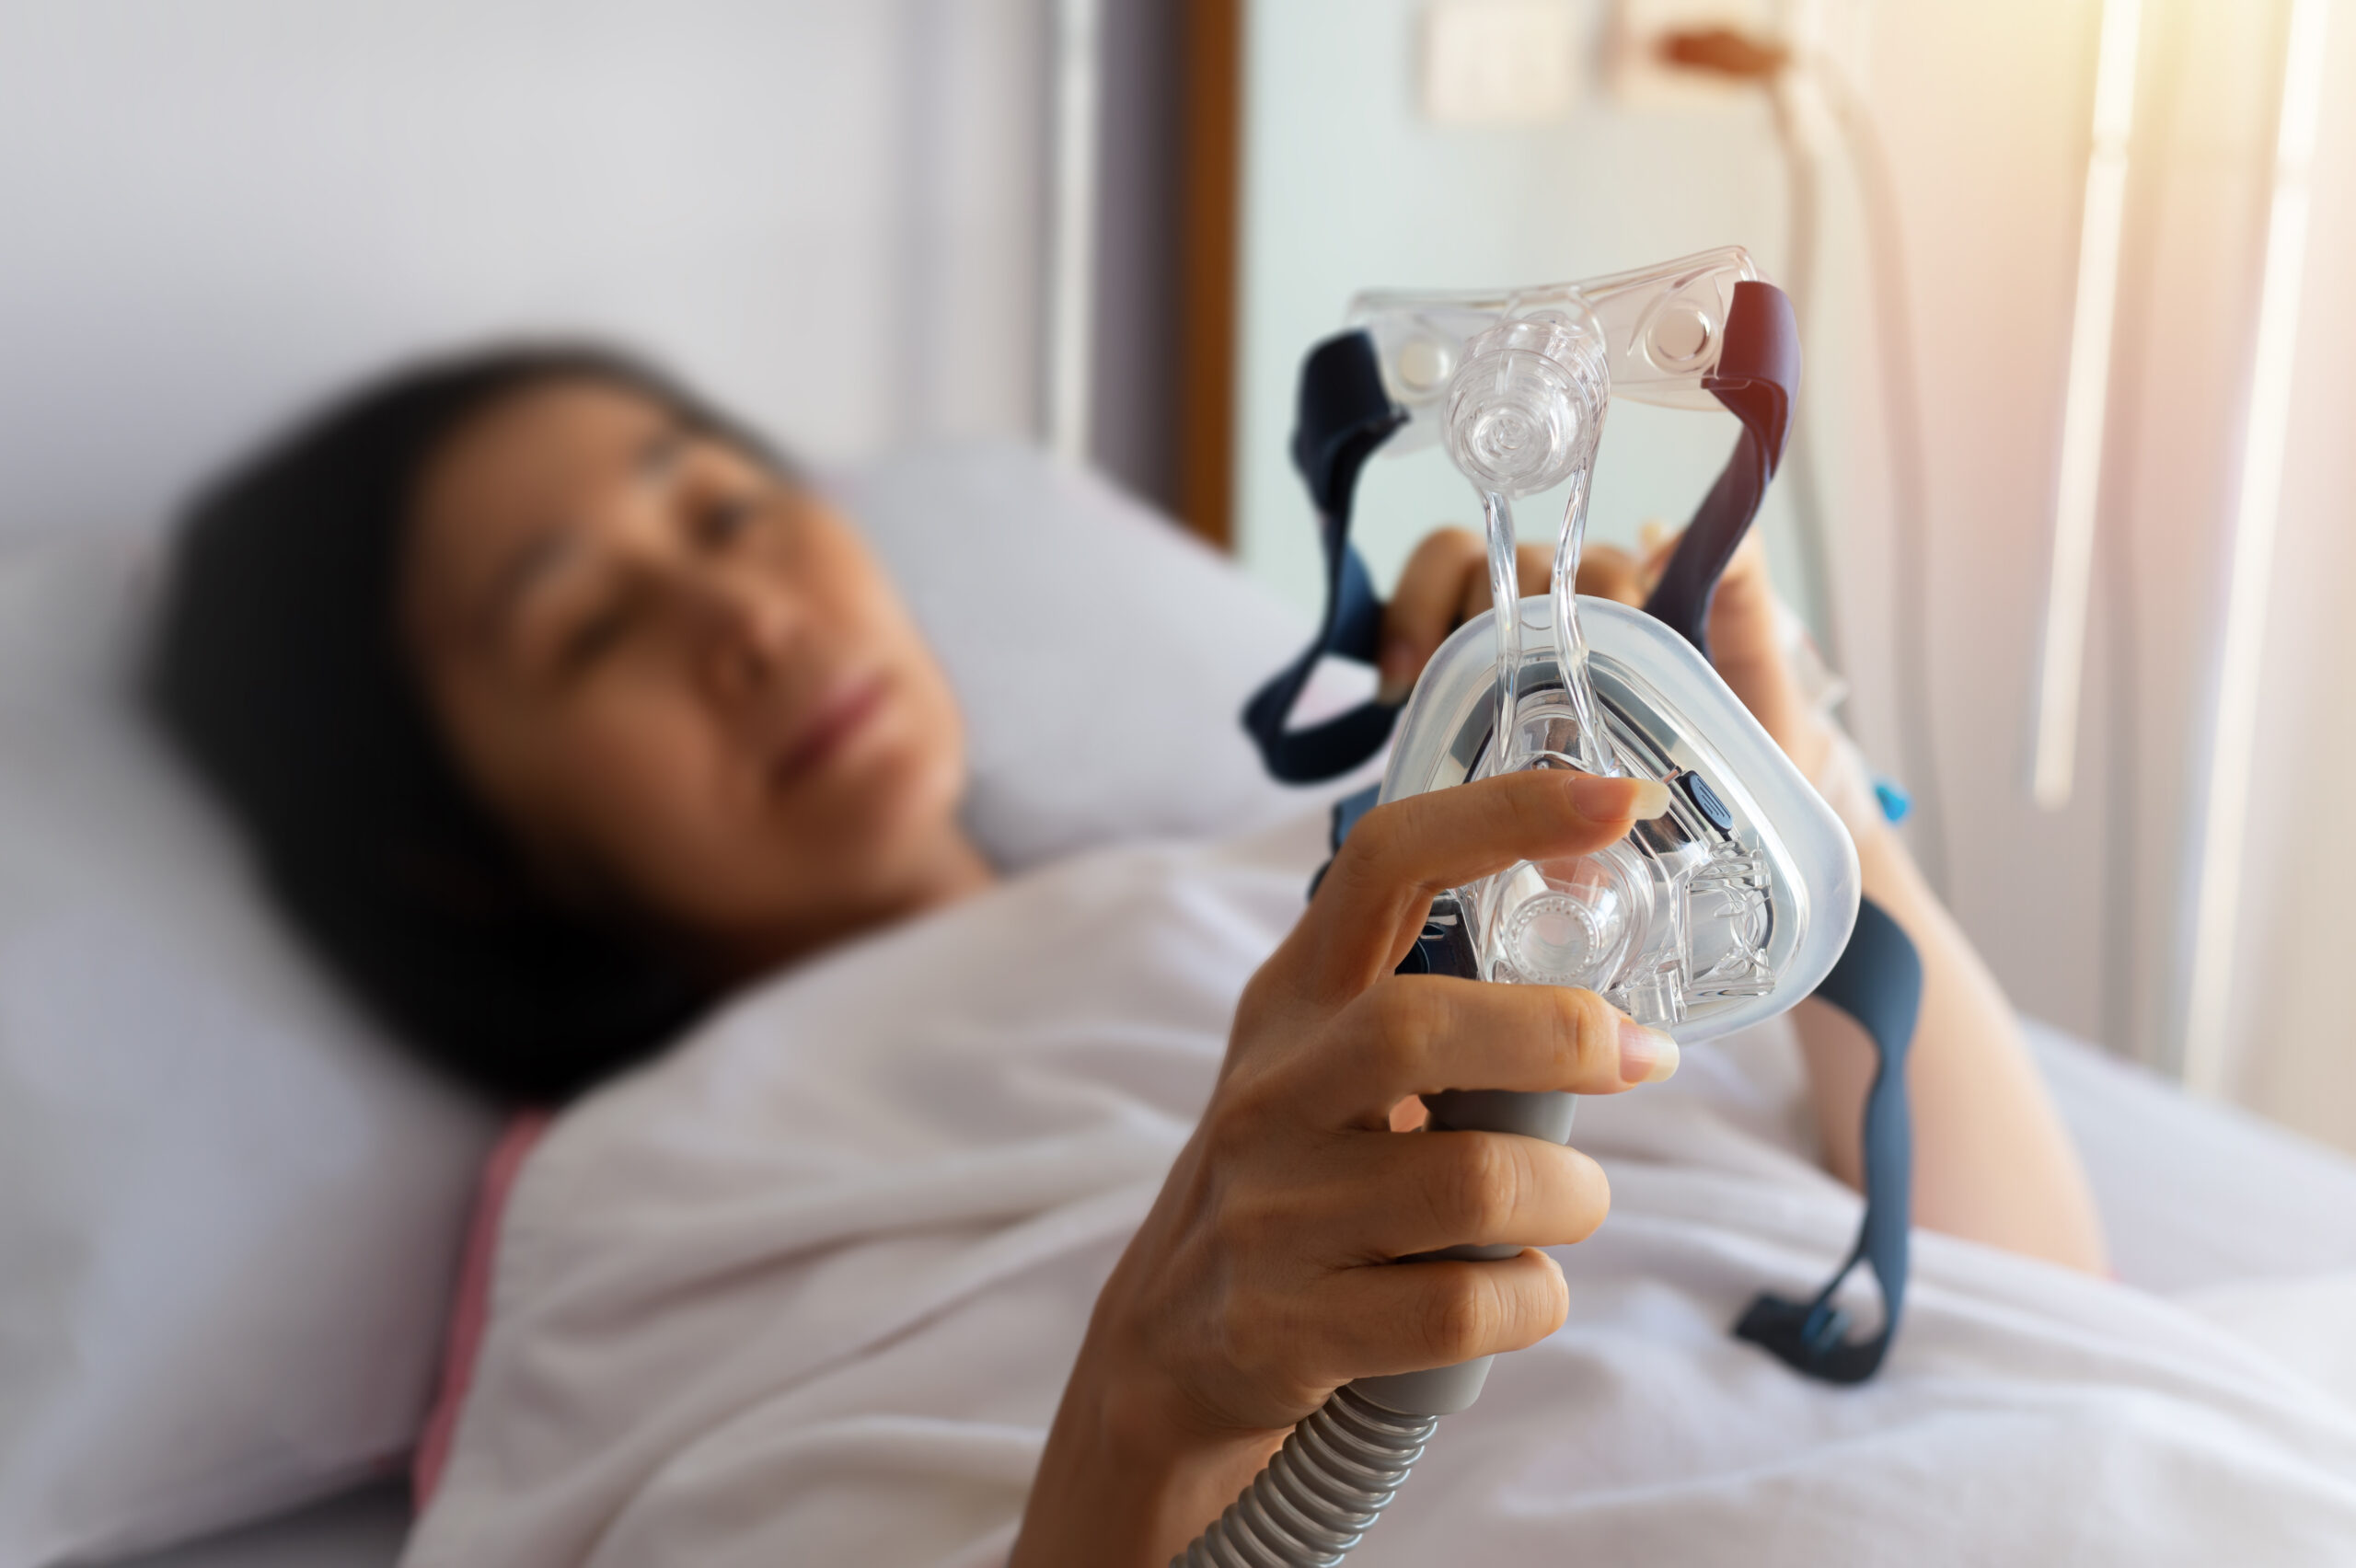 Filing a Claim for an Injury Caused by the Phillips CPAP